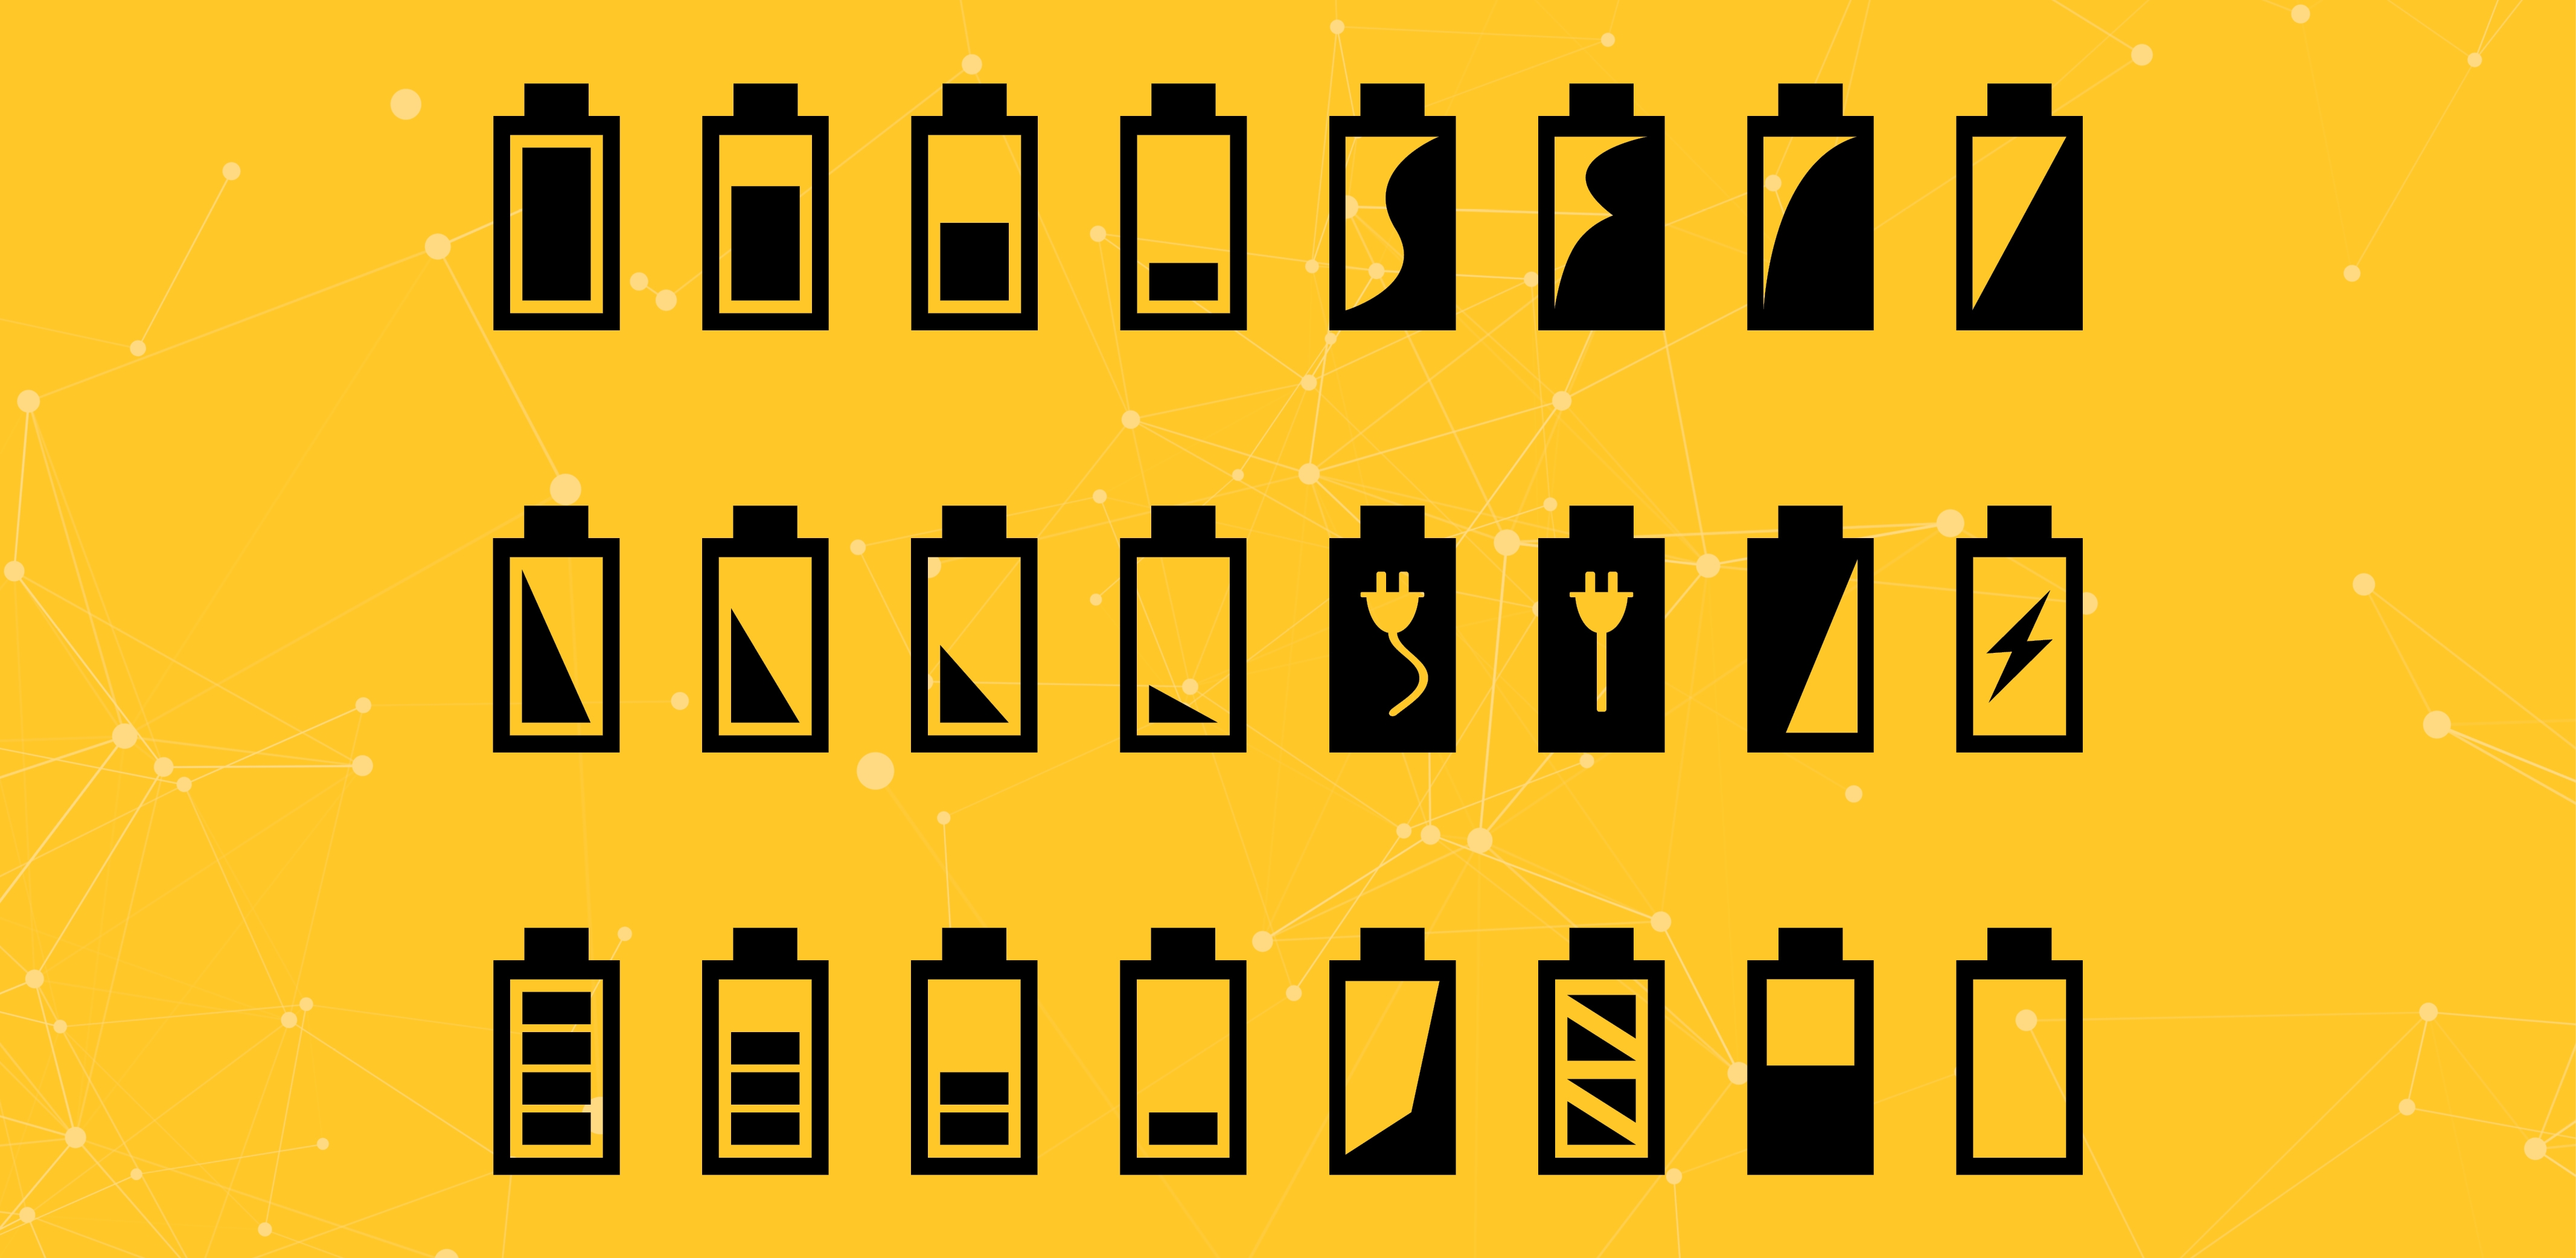 Illustration of battery silhouettes against a gold colored background.